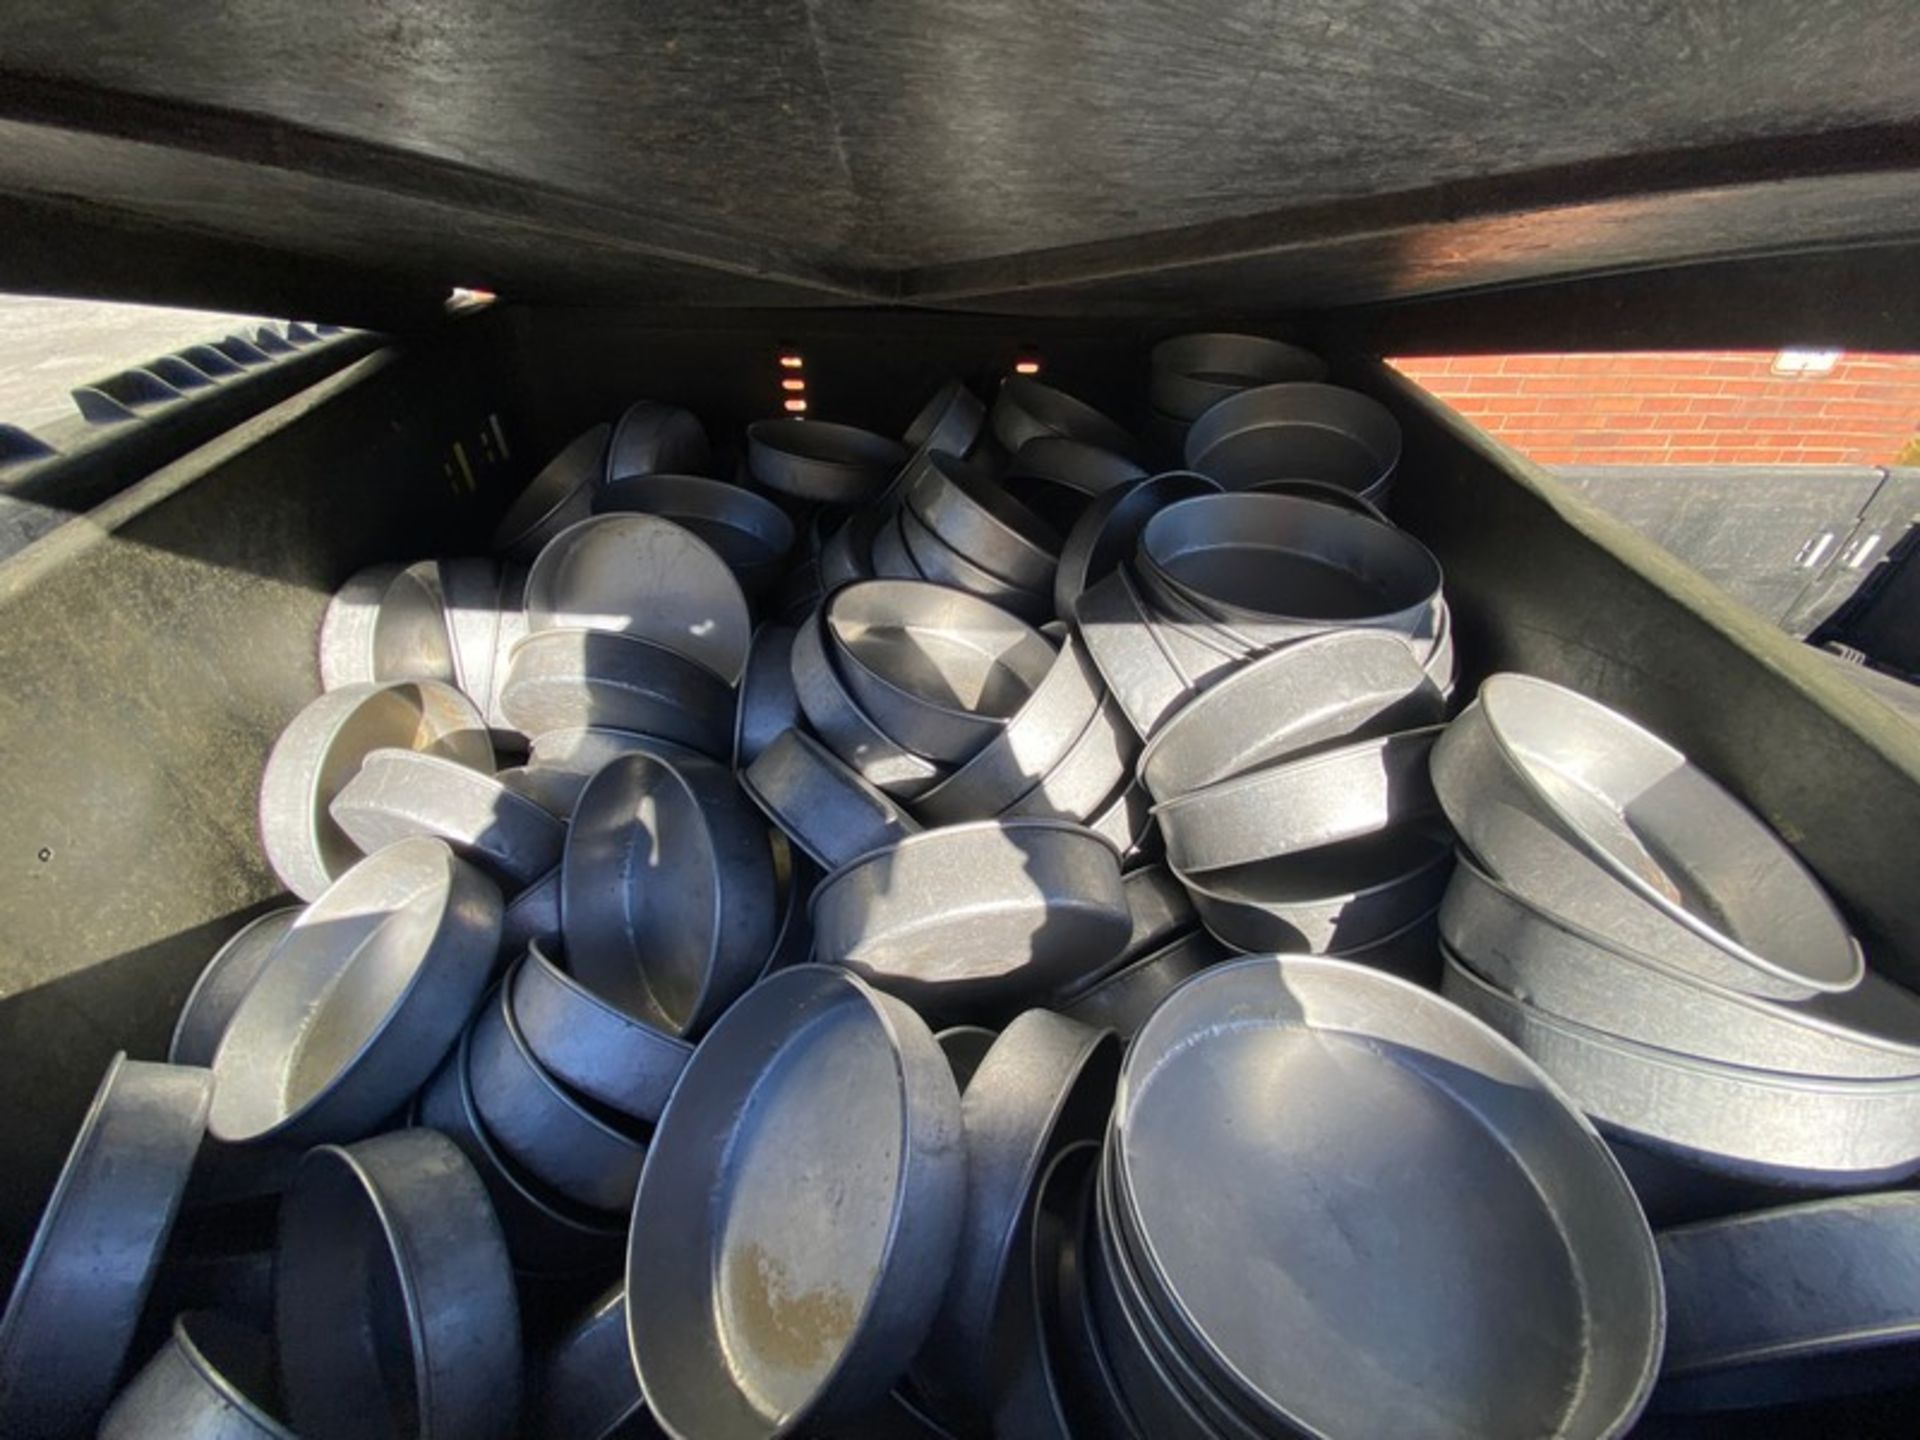 Lot of Assorted 8” Round Aluminum Pans,Aprox. (200) Pans with Aprox. 48” L x 45” W x 49” H Plastic - Image 6 of 6